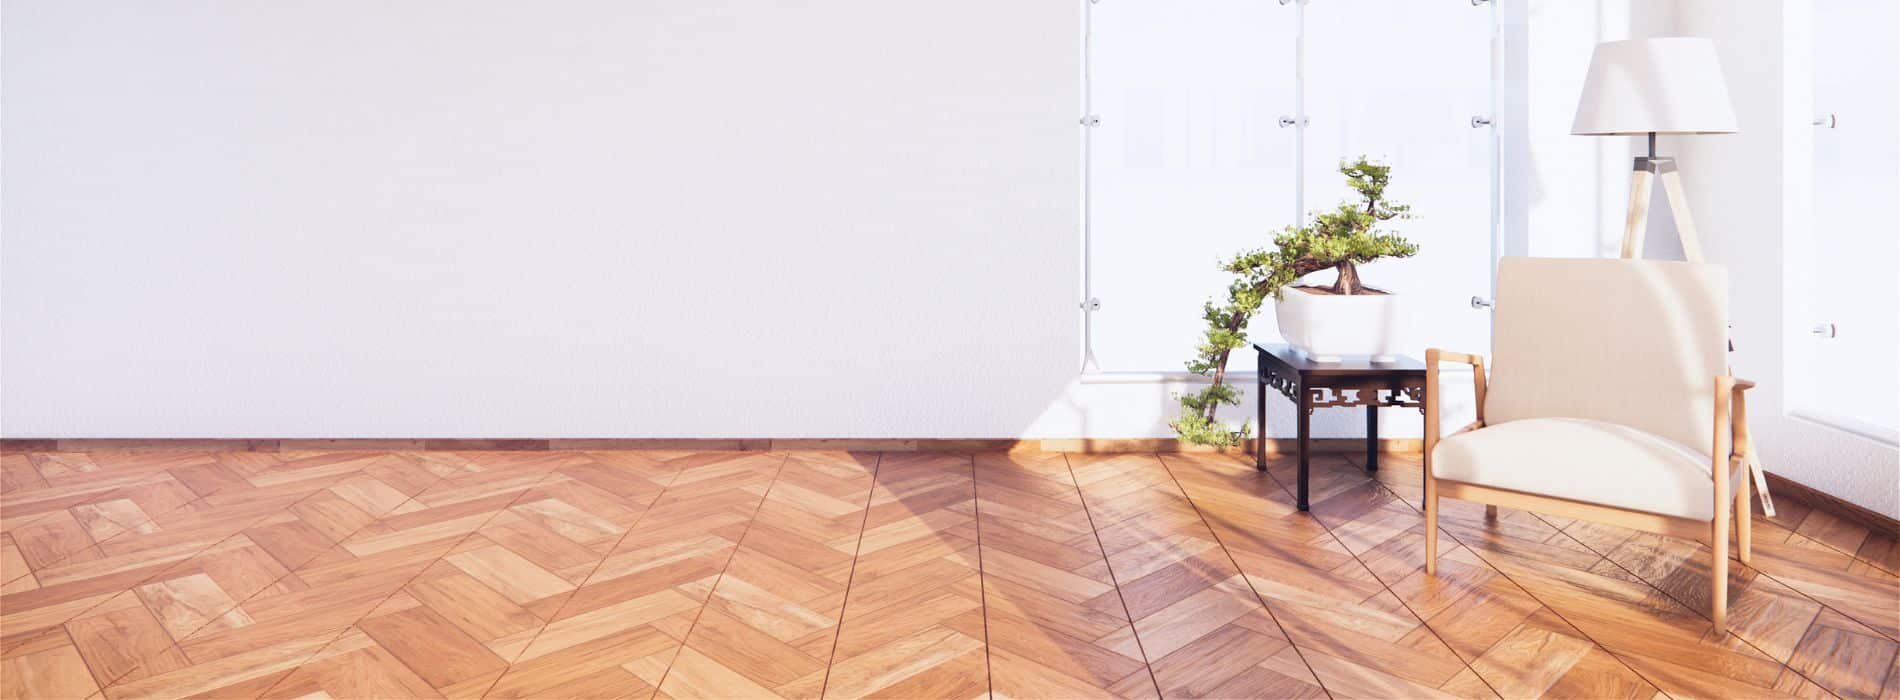 Expertly restored 8-year-old hardwood floor in Bethnal Green, E2. Bona 2.2K Frost whitewashing and Traffic HD 16% sheen matte lacquer used by Mr Sander®. Durable and stunning finish for long-lasting beauty.